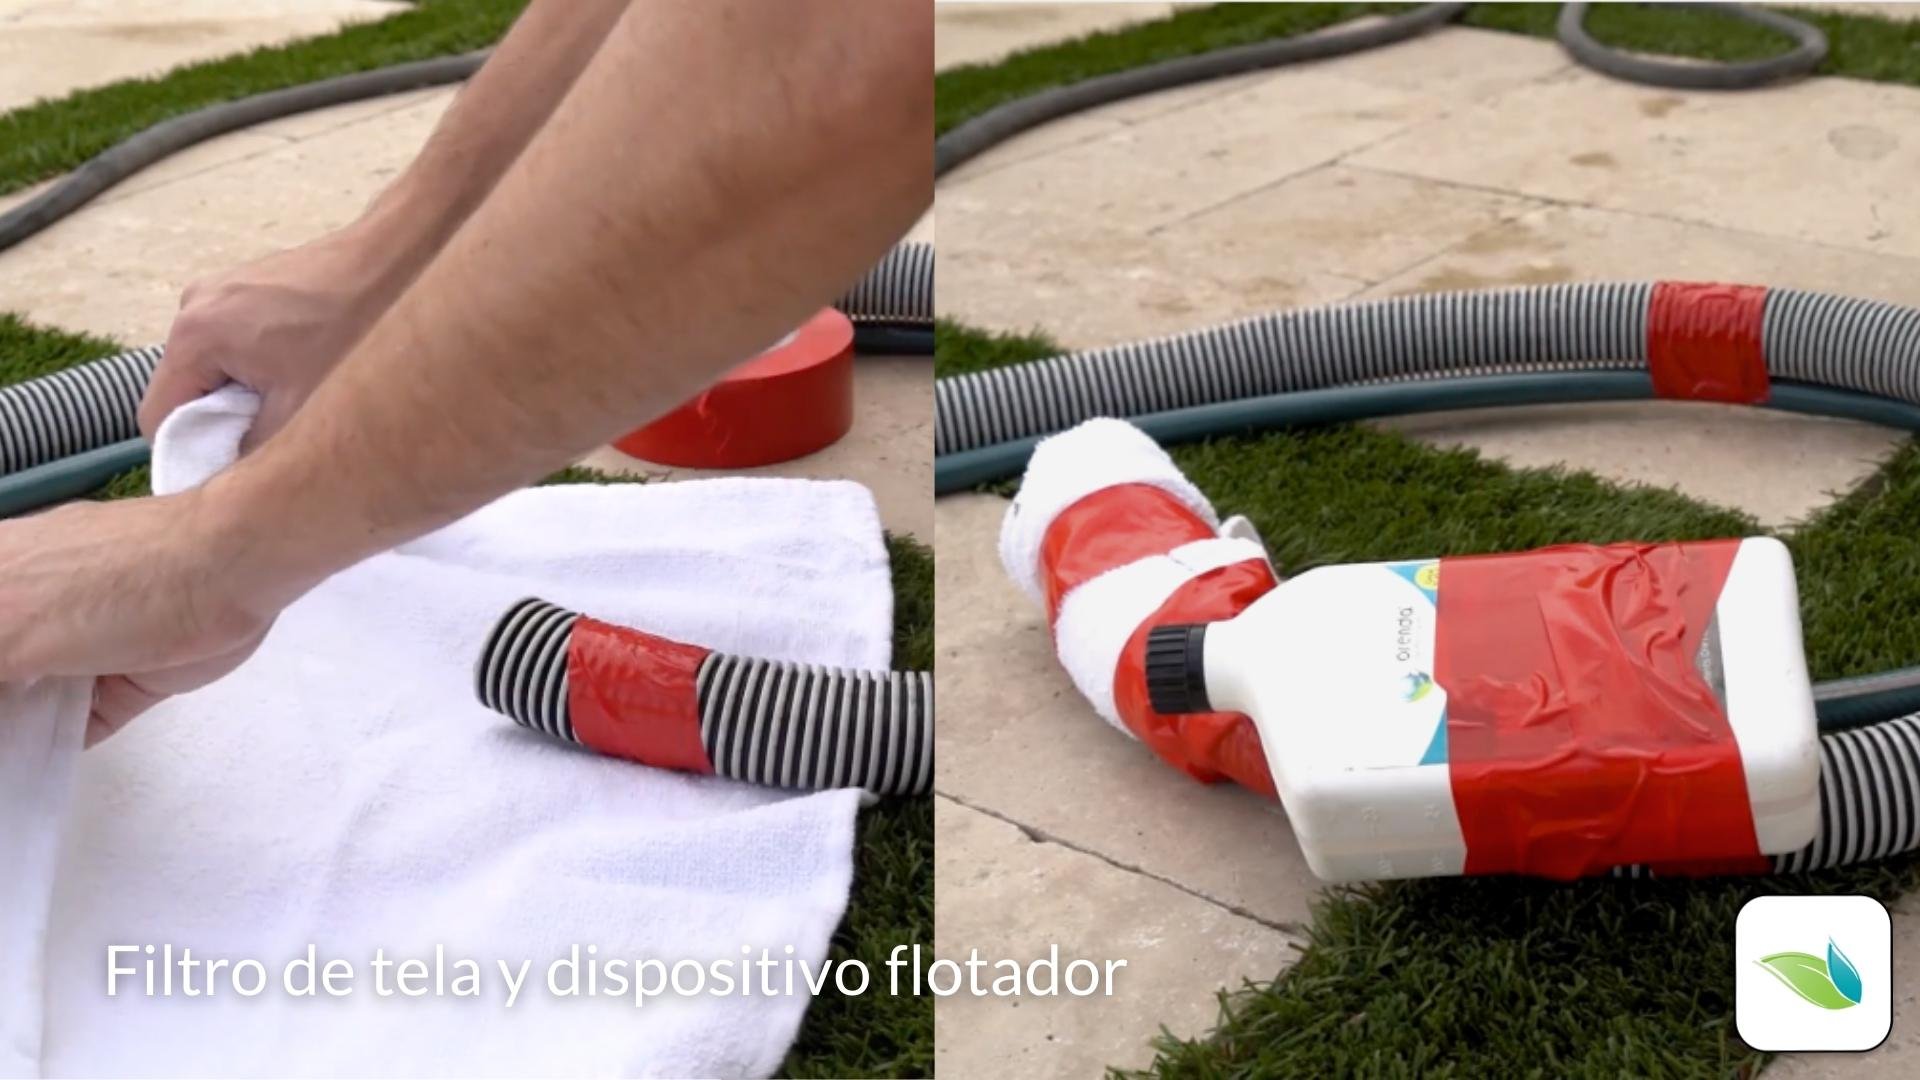 Cloth filter and floating device, startup (spanish)